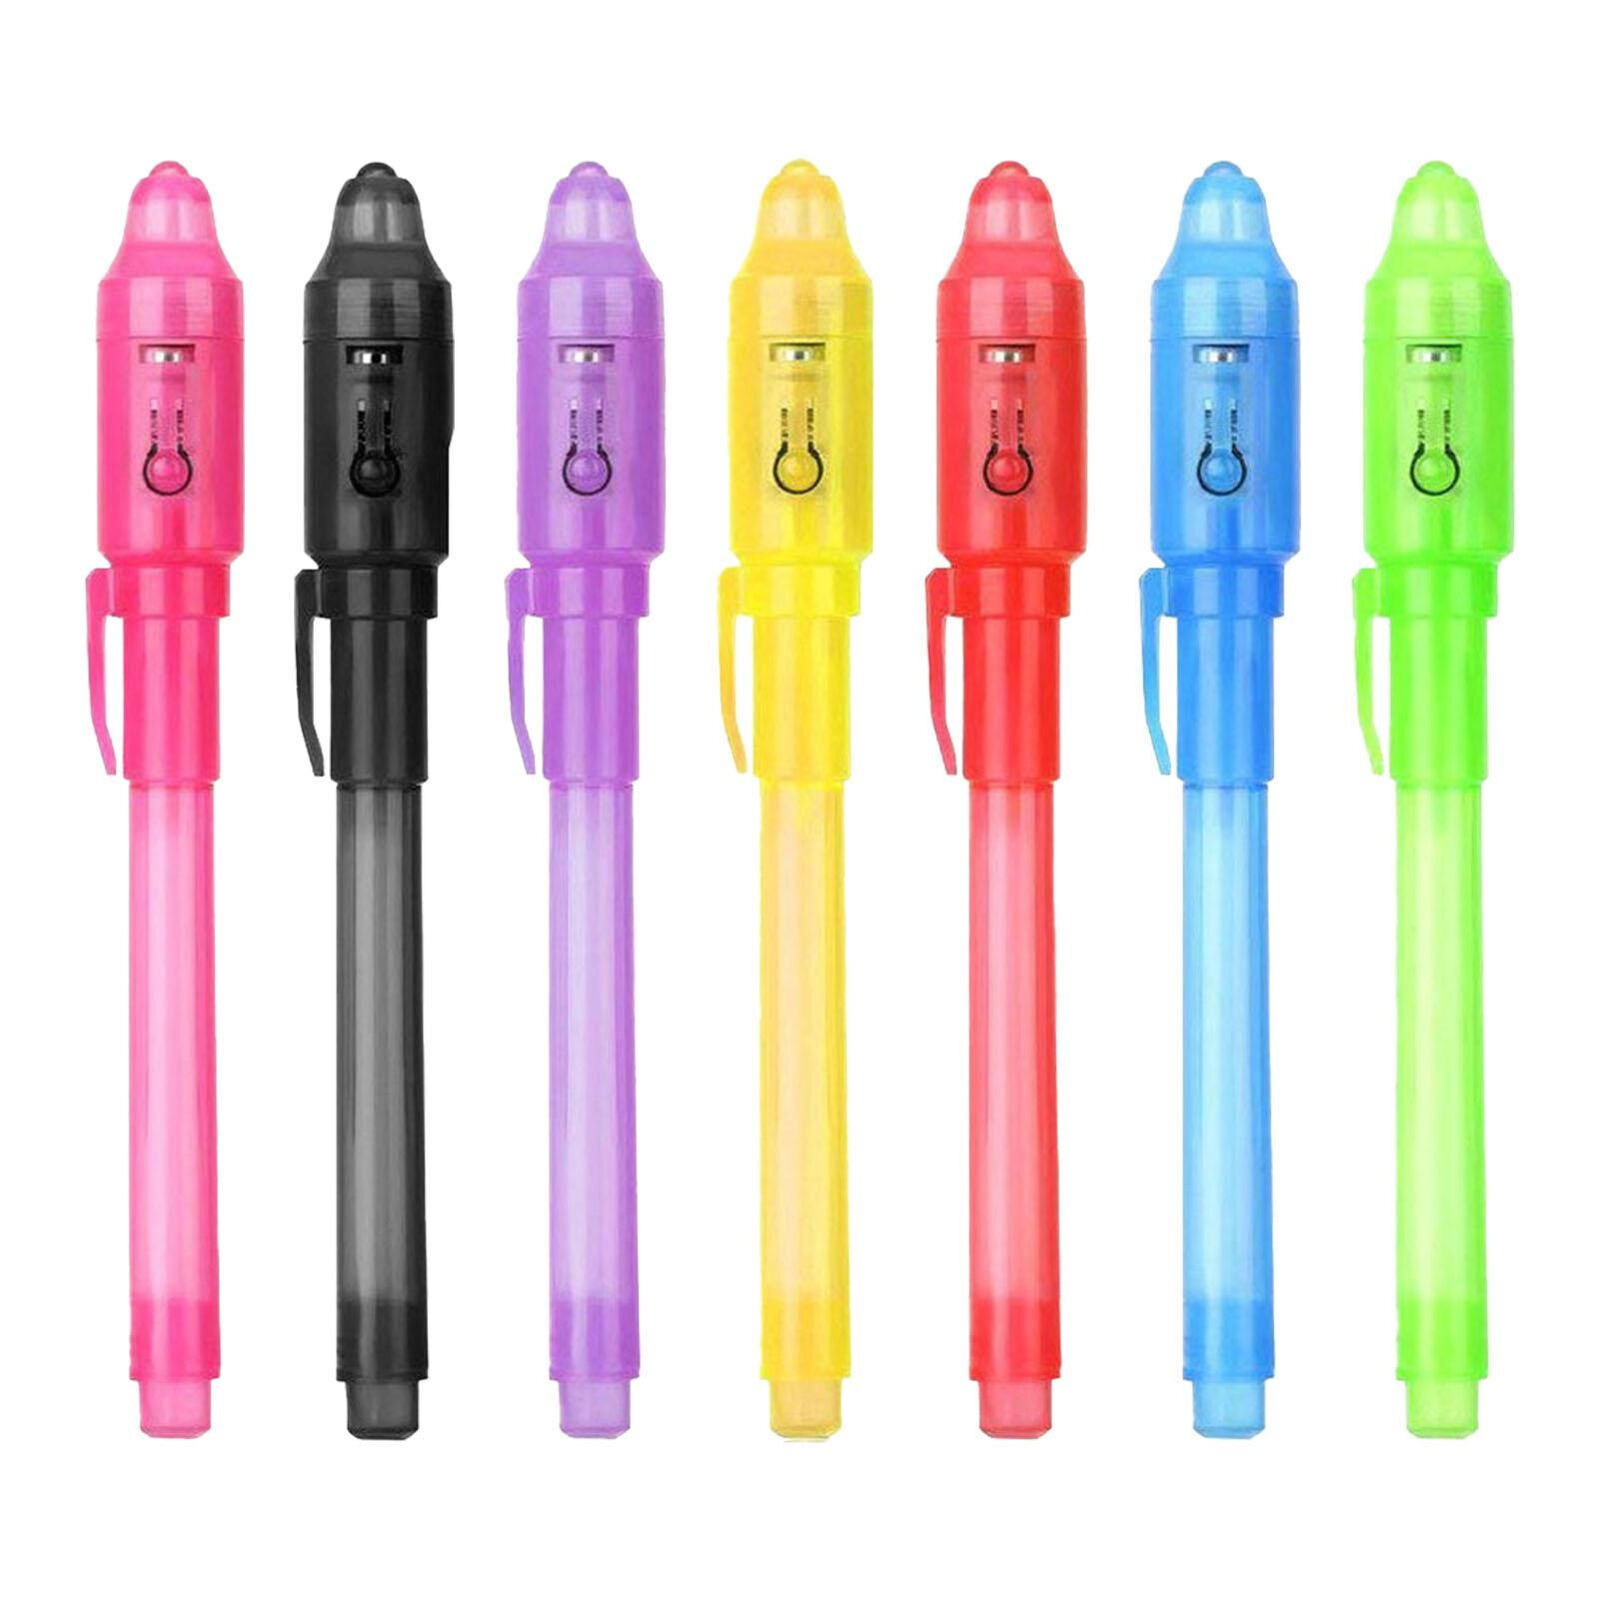 7PCS Invisible Ink Spy Pen With Built In UV Light Magic Marker Secret Message